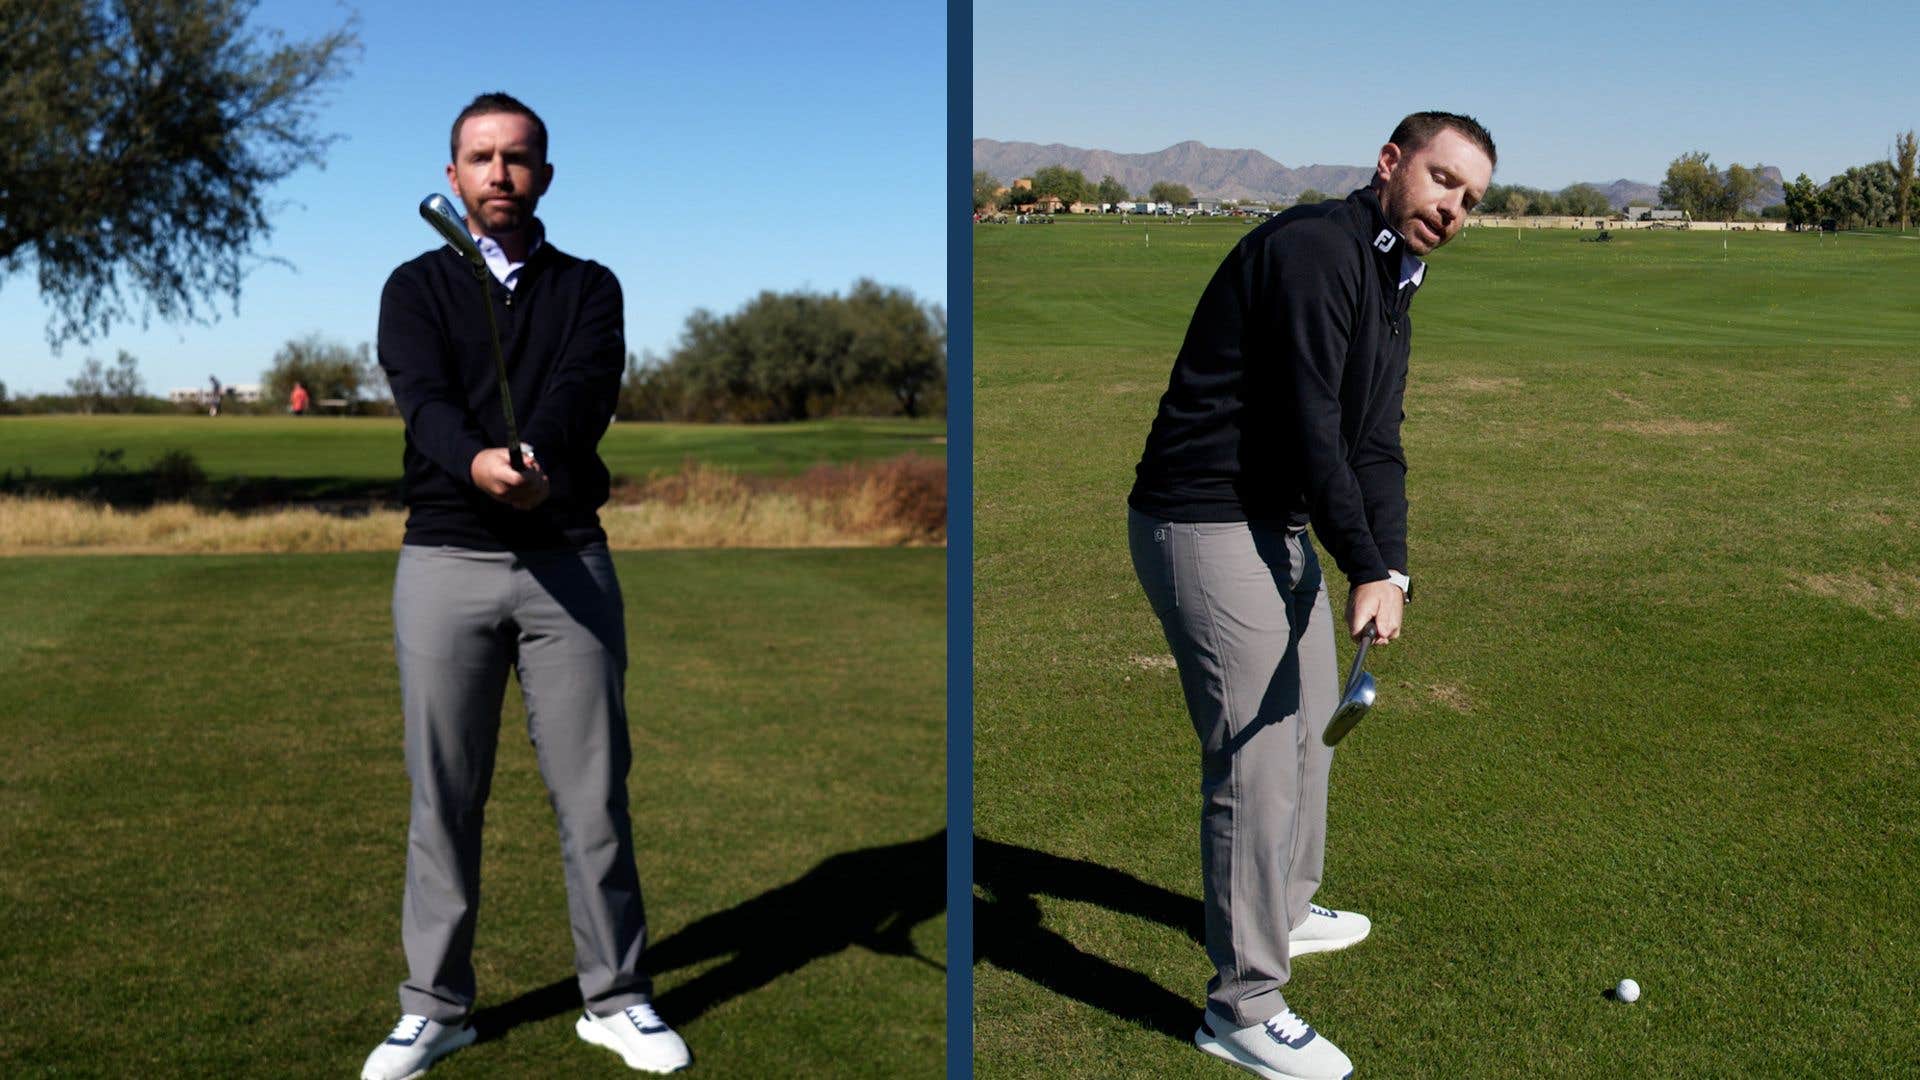 An easy tip to help square your club and hit more flush shots